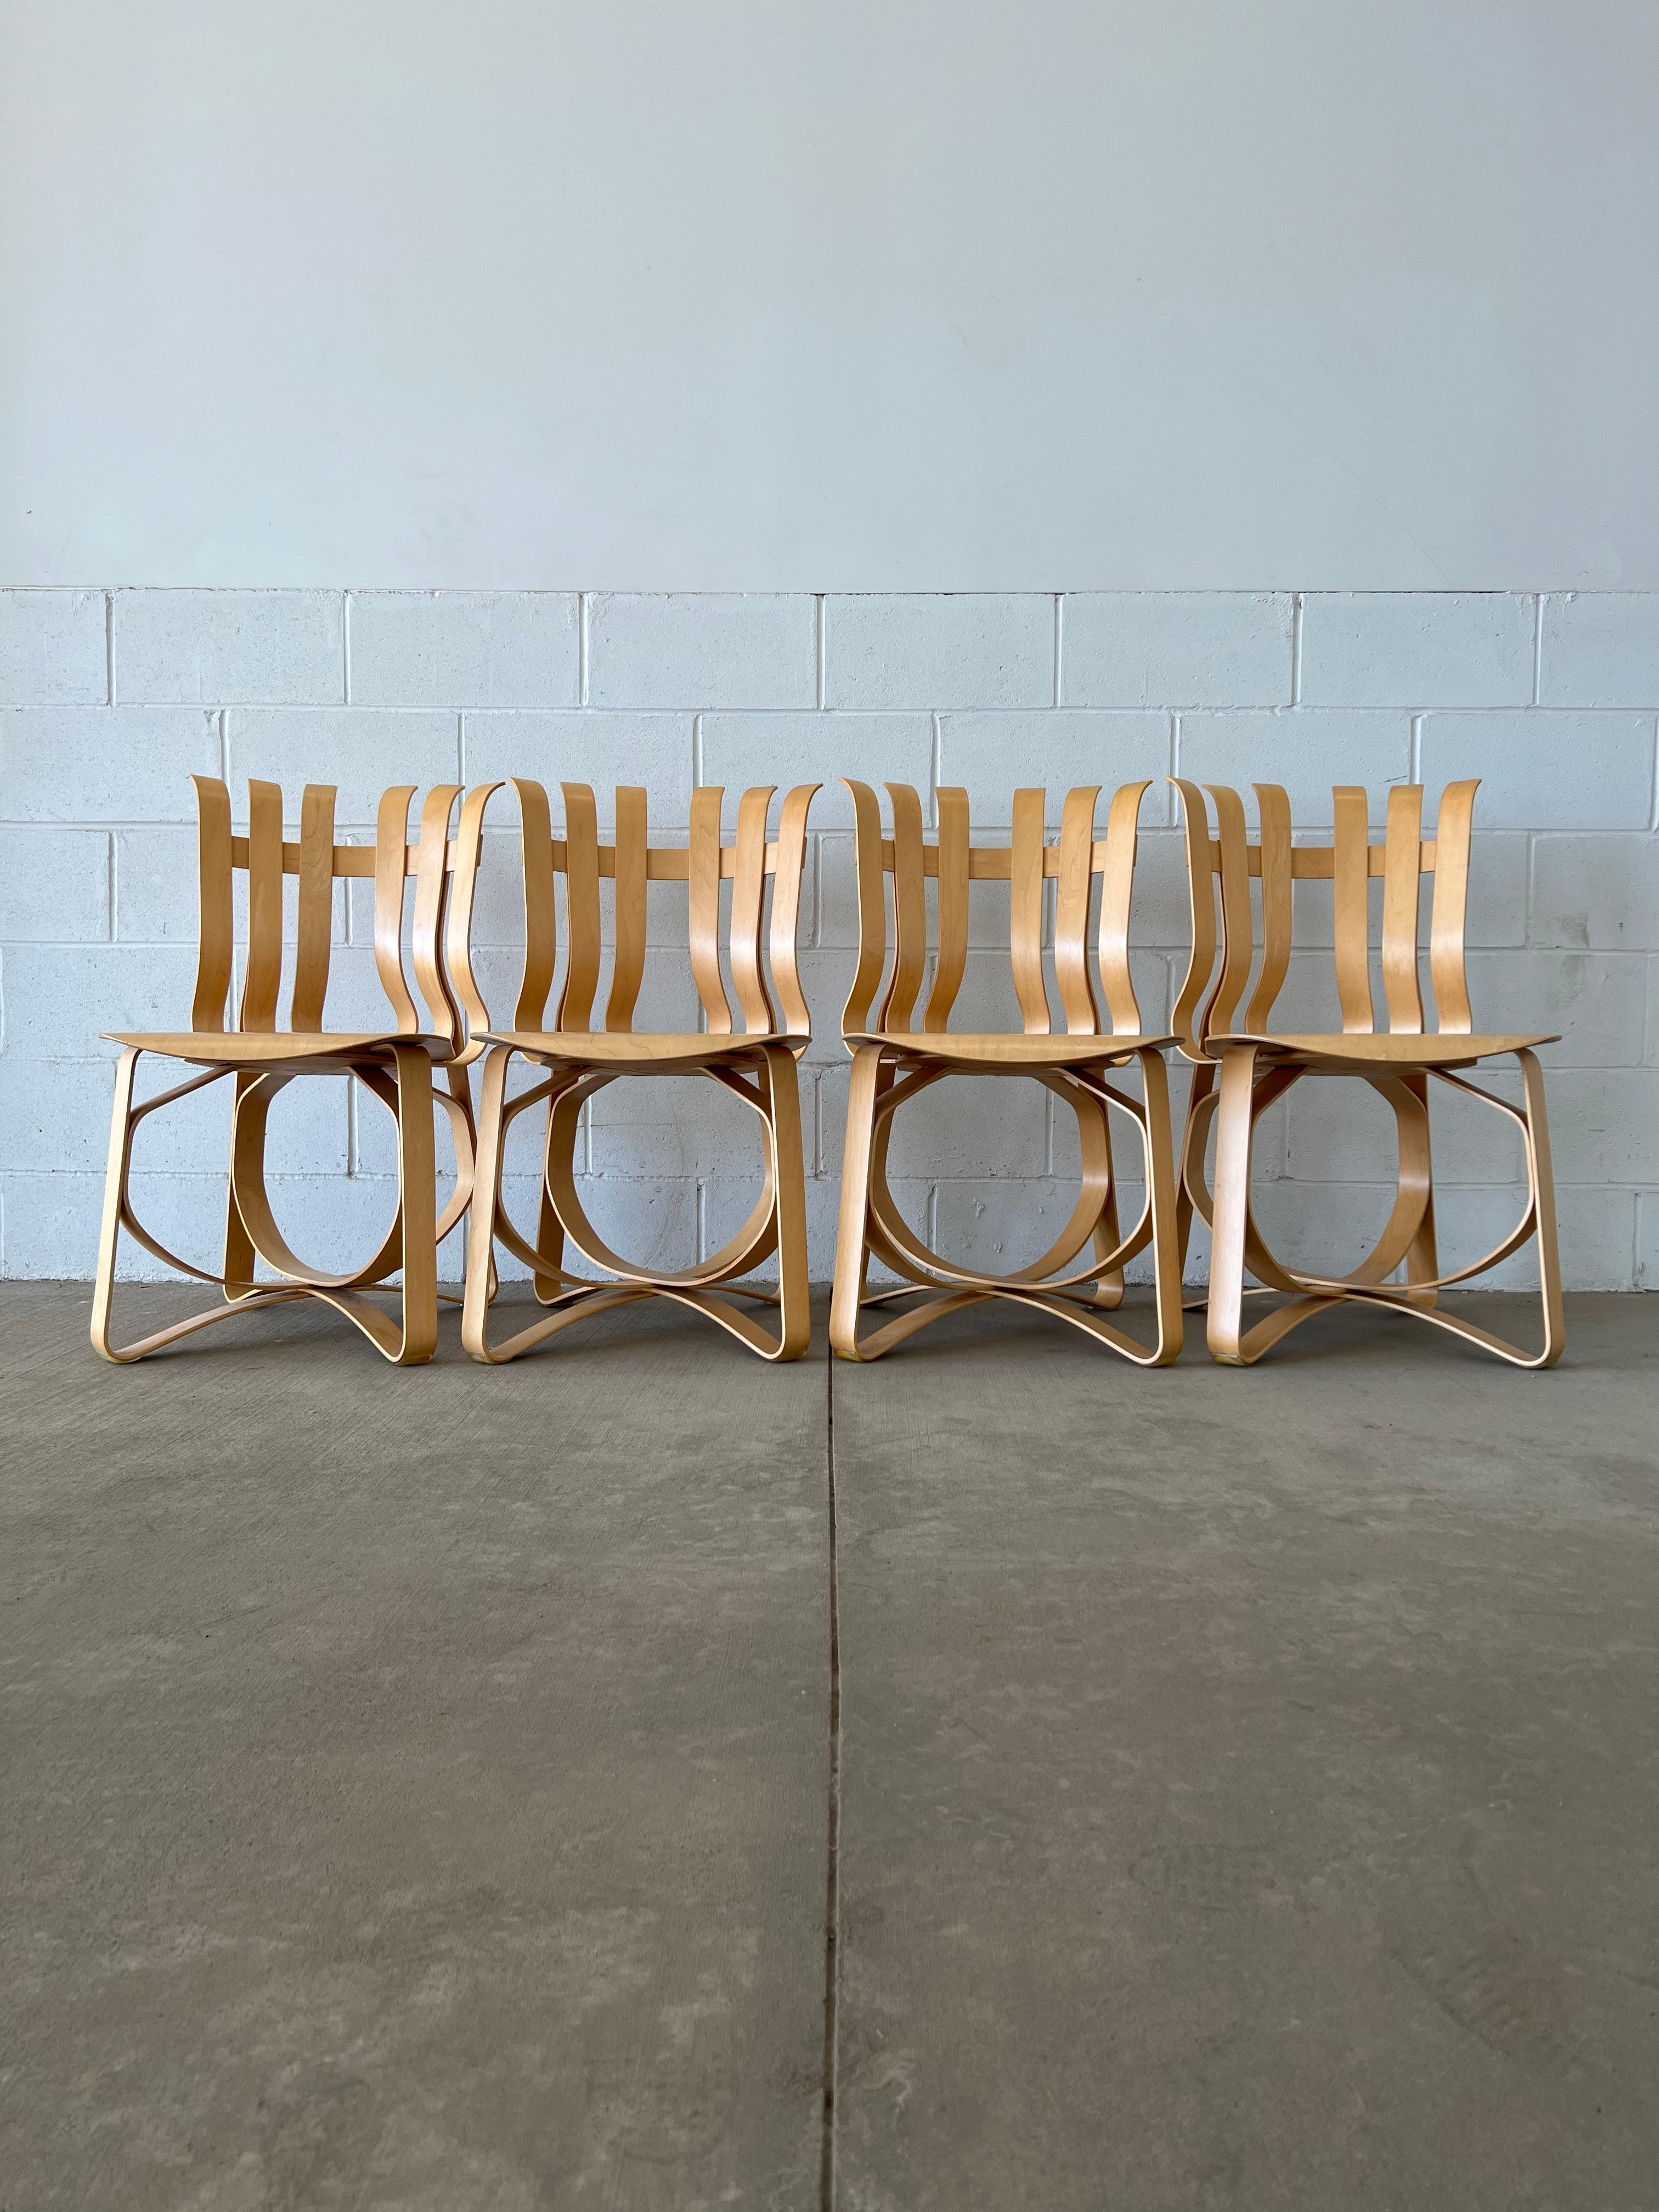 Inspired by the surprising strength of the apple crates he played on as a child, Frank Gehry created his thoroughly original collection of bentwood furniture. The ribbon-like designs transcend the conventions of style by exploring, as the great